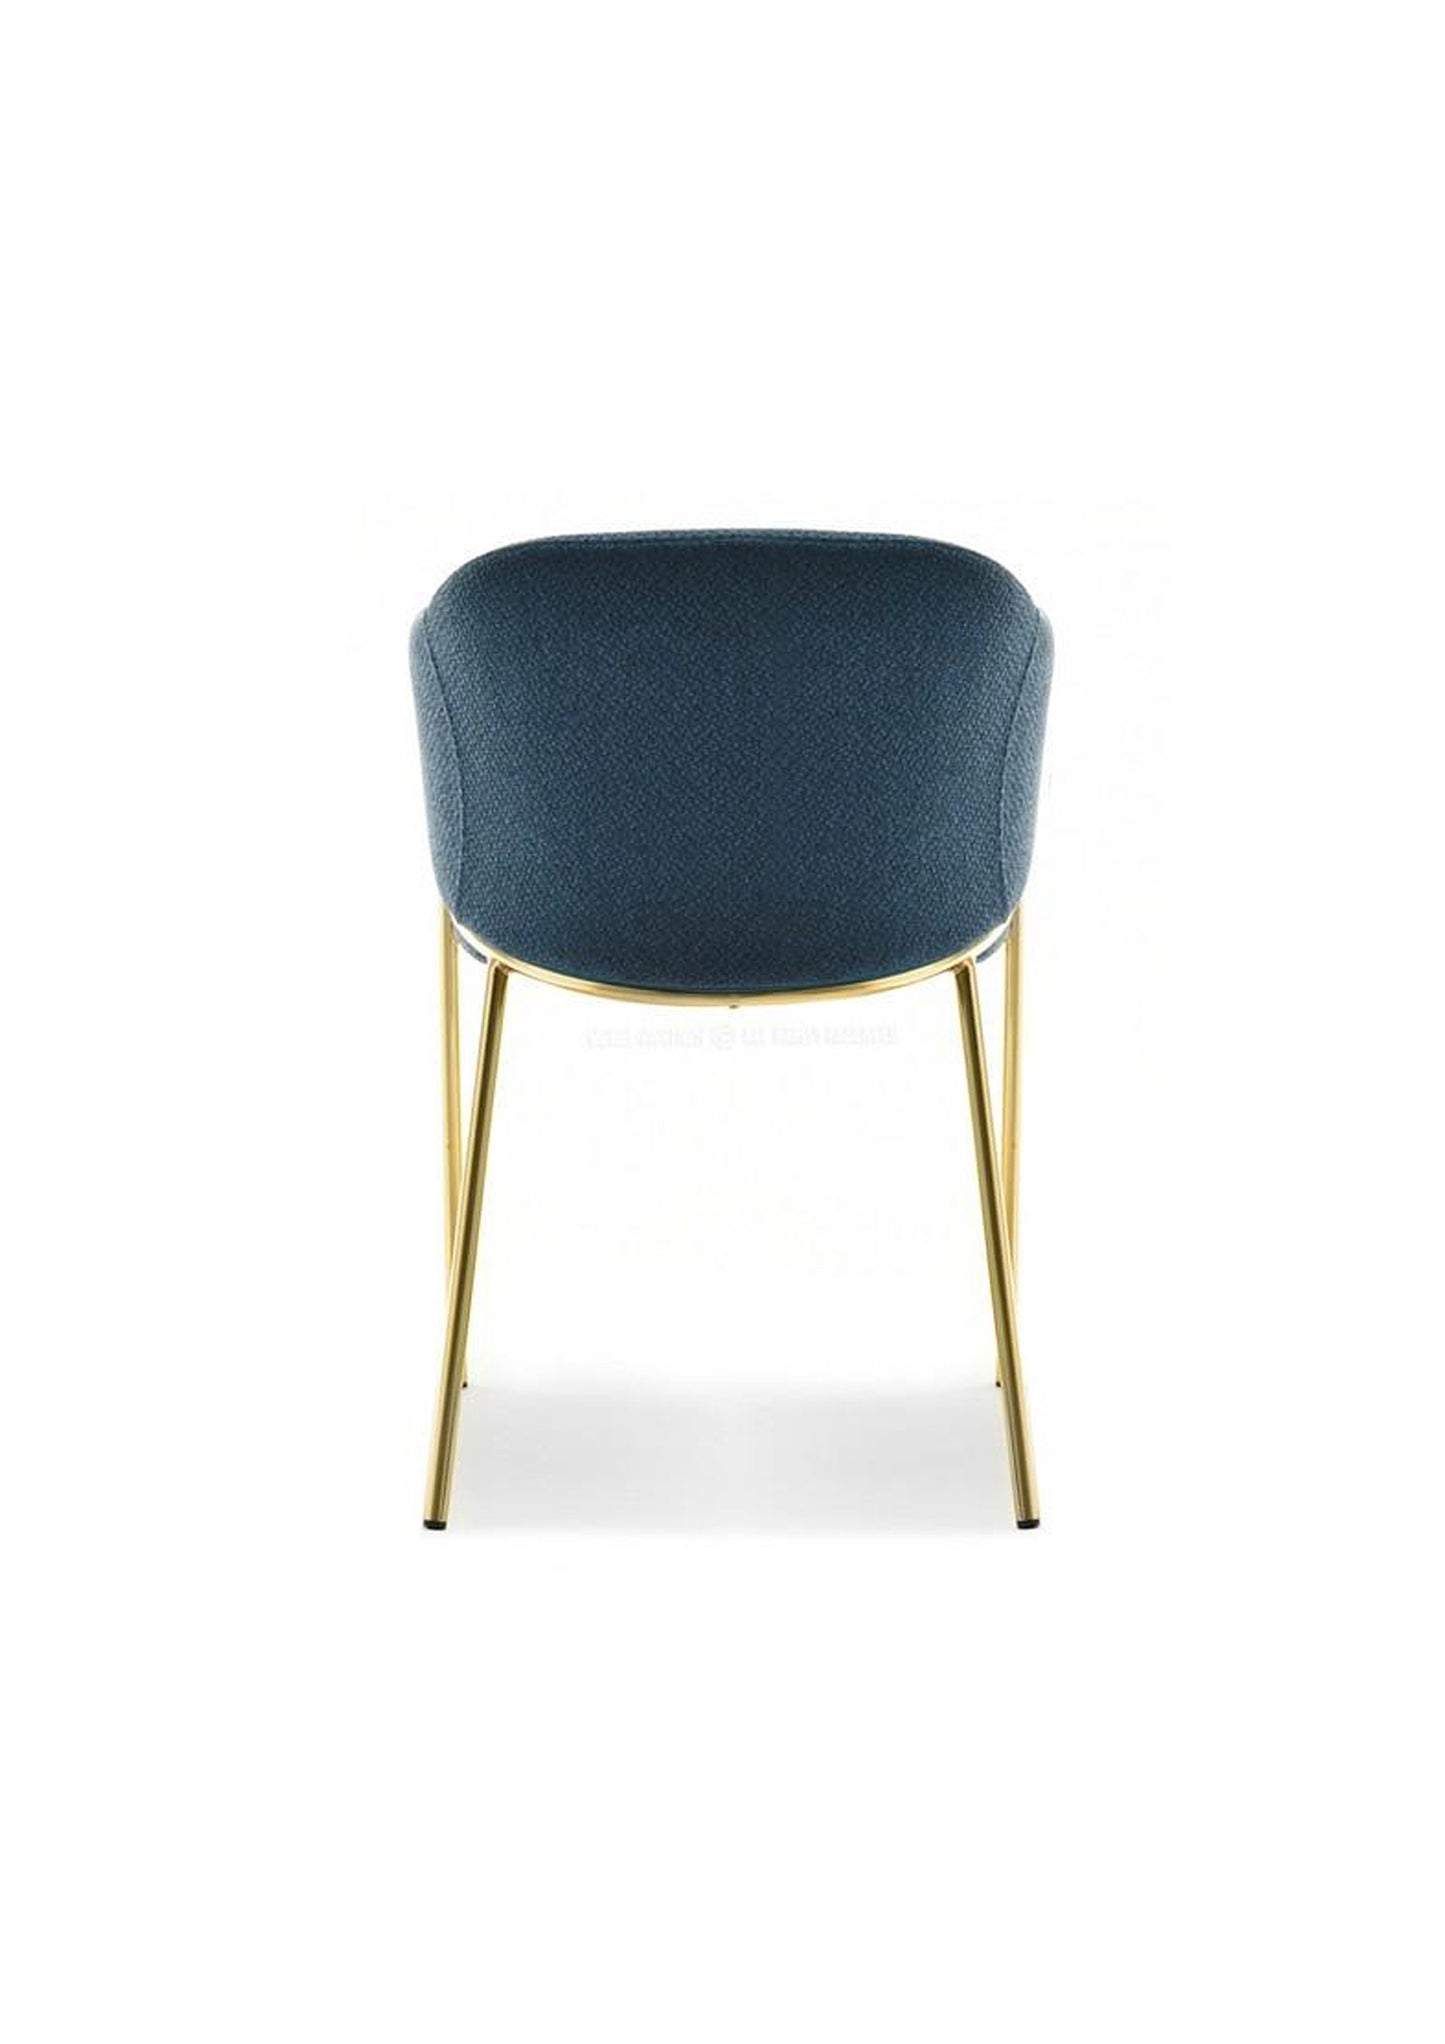 NEW Beautiful Elegant Designer Gold and Blue Dining Office Desk Chair